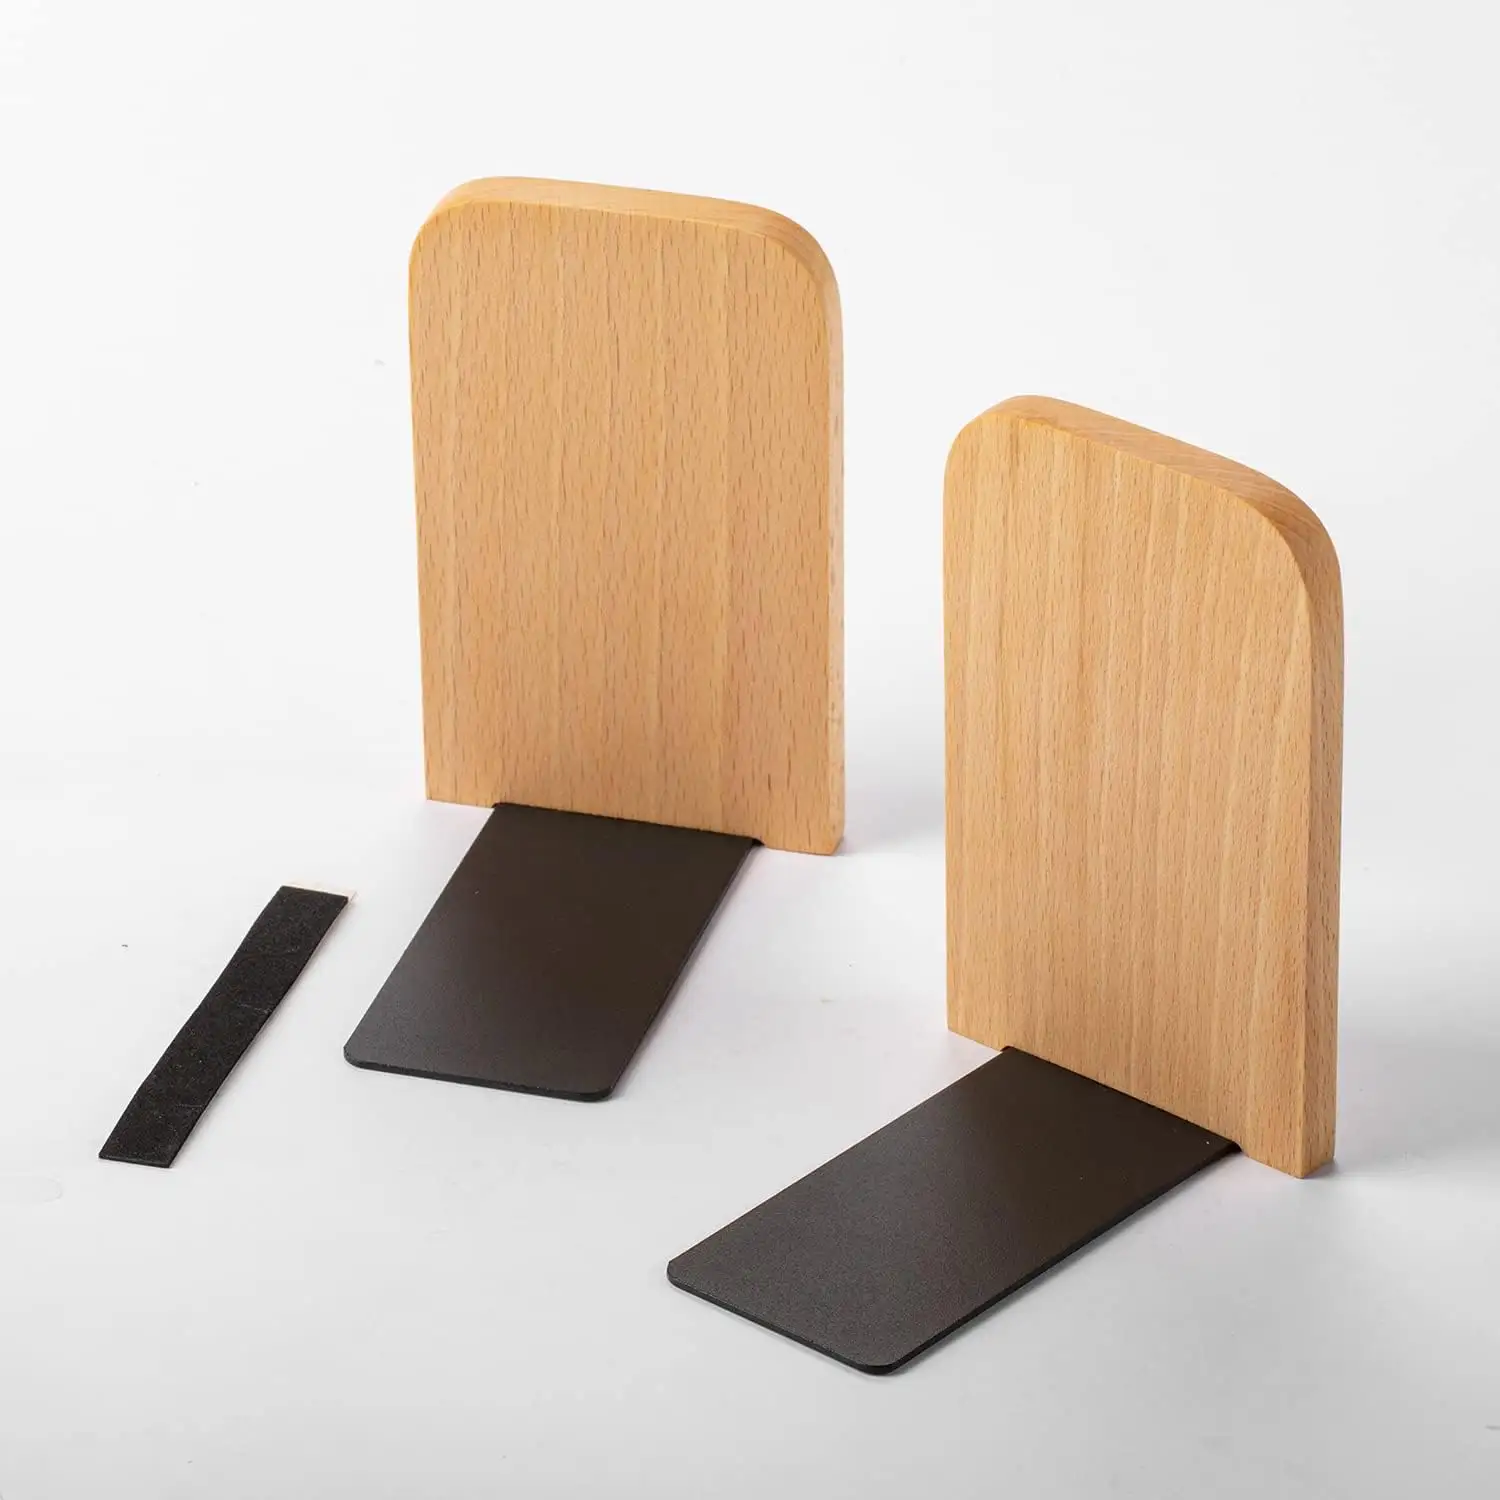 Wood Book Ends for Shelves, Wooden Bookend Support for Books and Movies